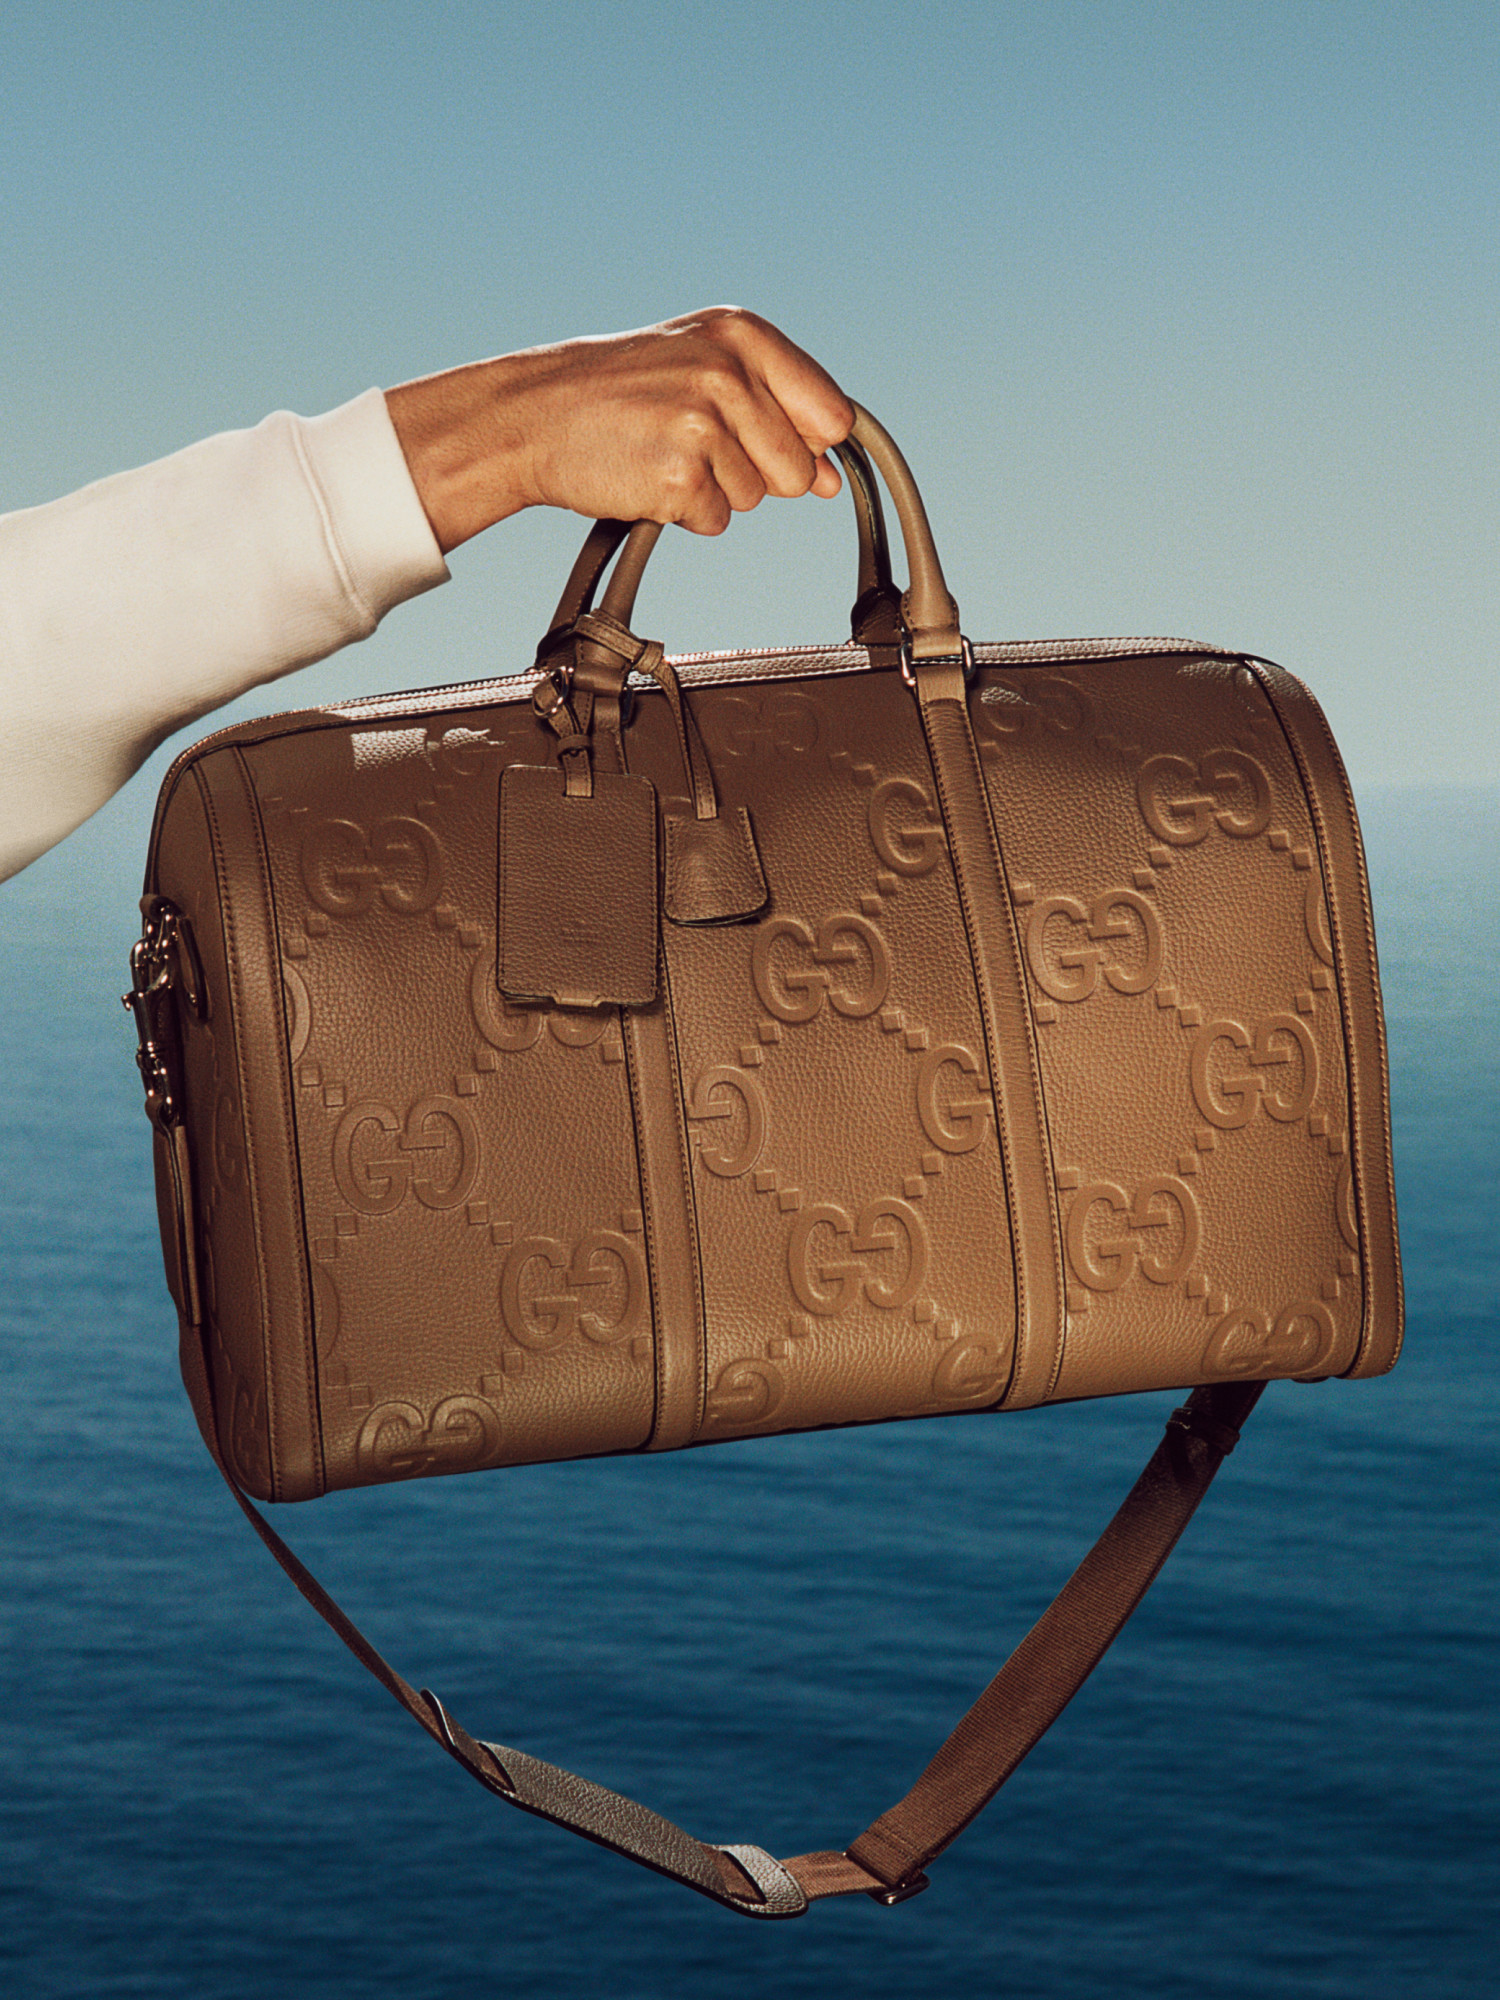 A close-up on a brown duffel bag made from leather with an allover embossed GG pattern.